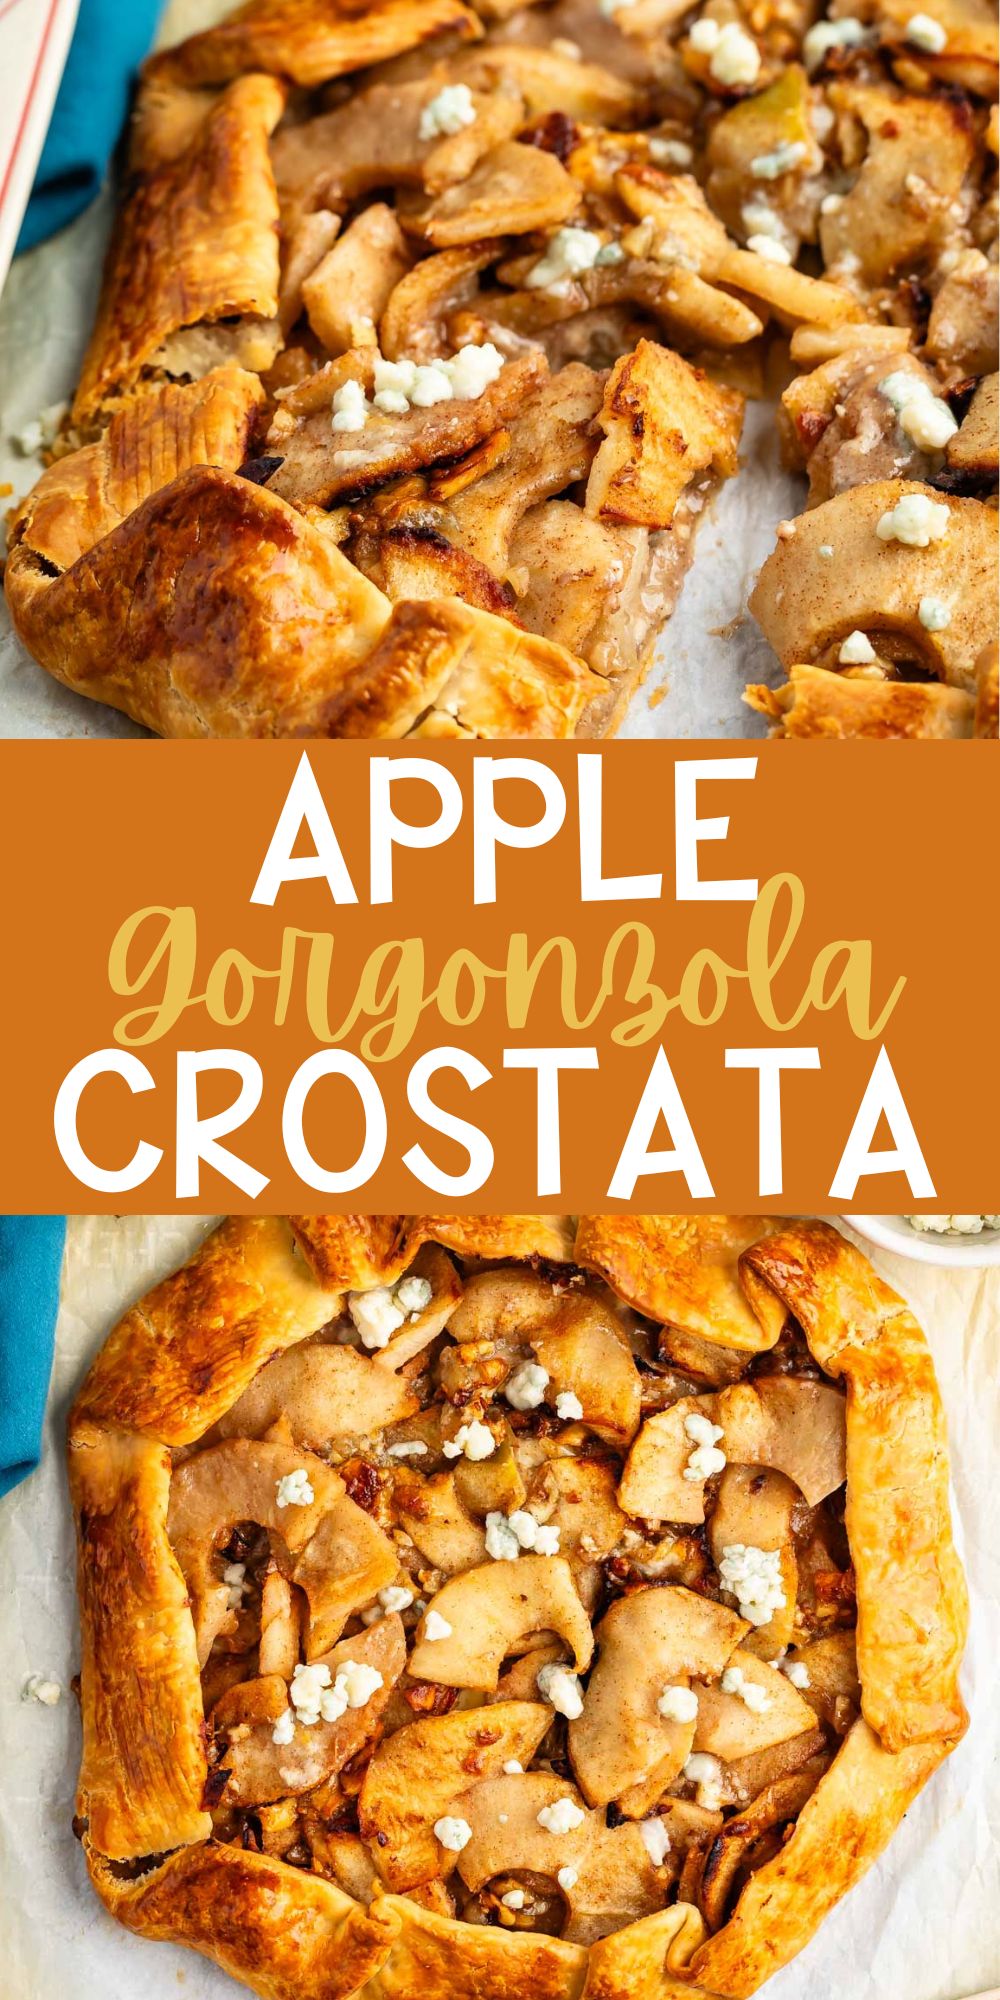 two photos of apple gorgonzola crostata with apples and cheese in the crust with words on the image.